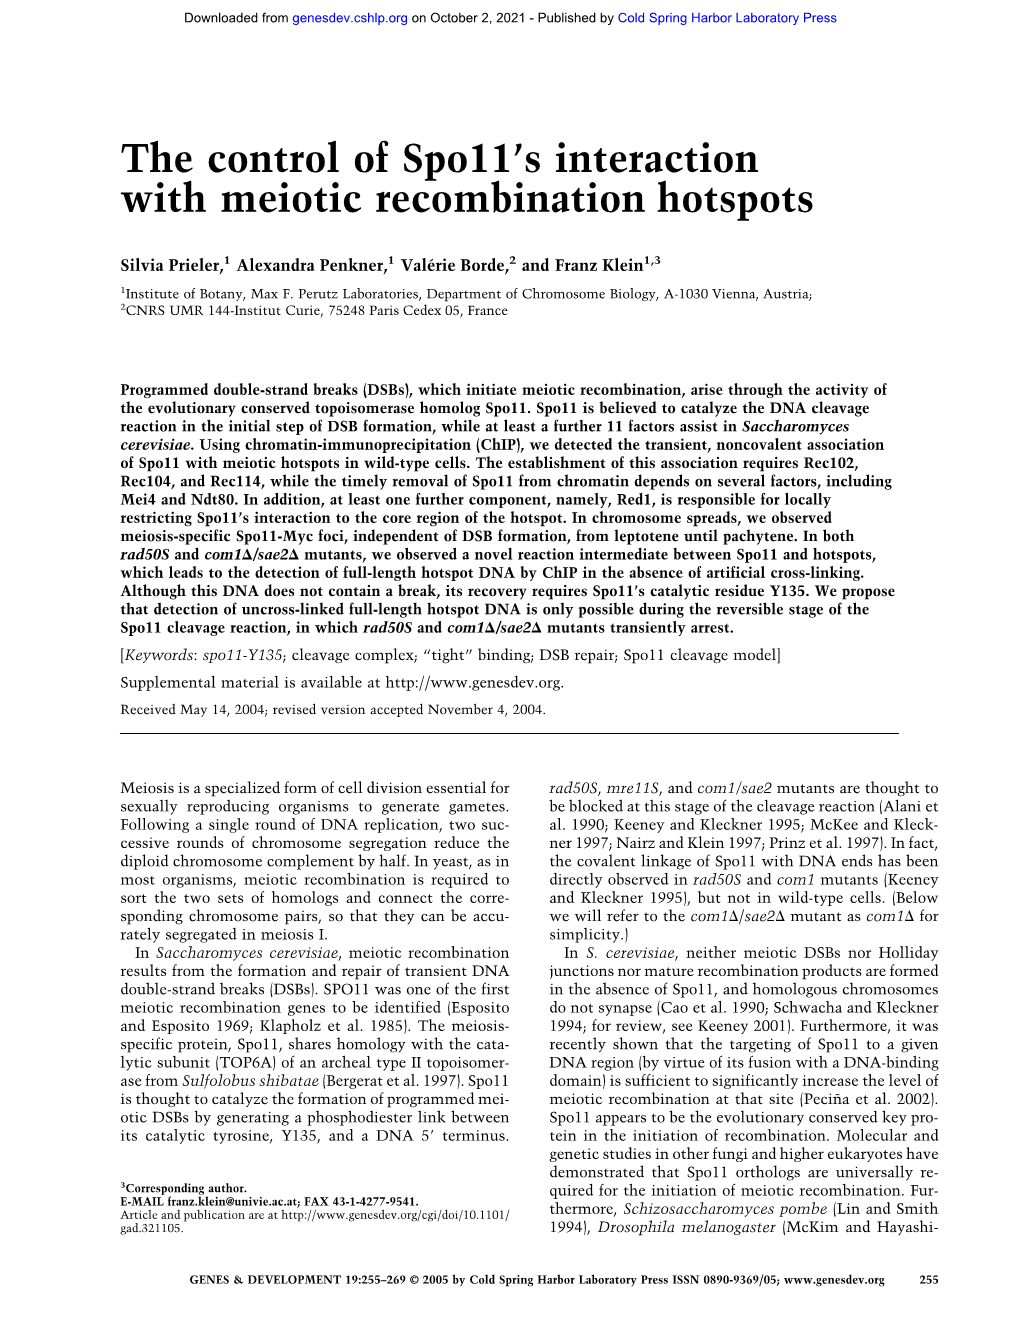 The Control of Spo11's Interaction with Meiotic Recombination Hotspots